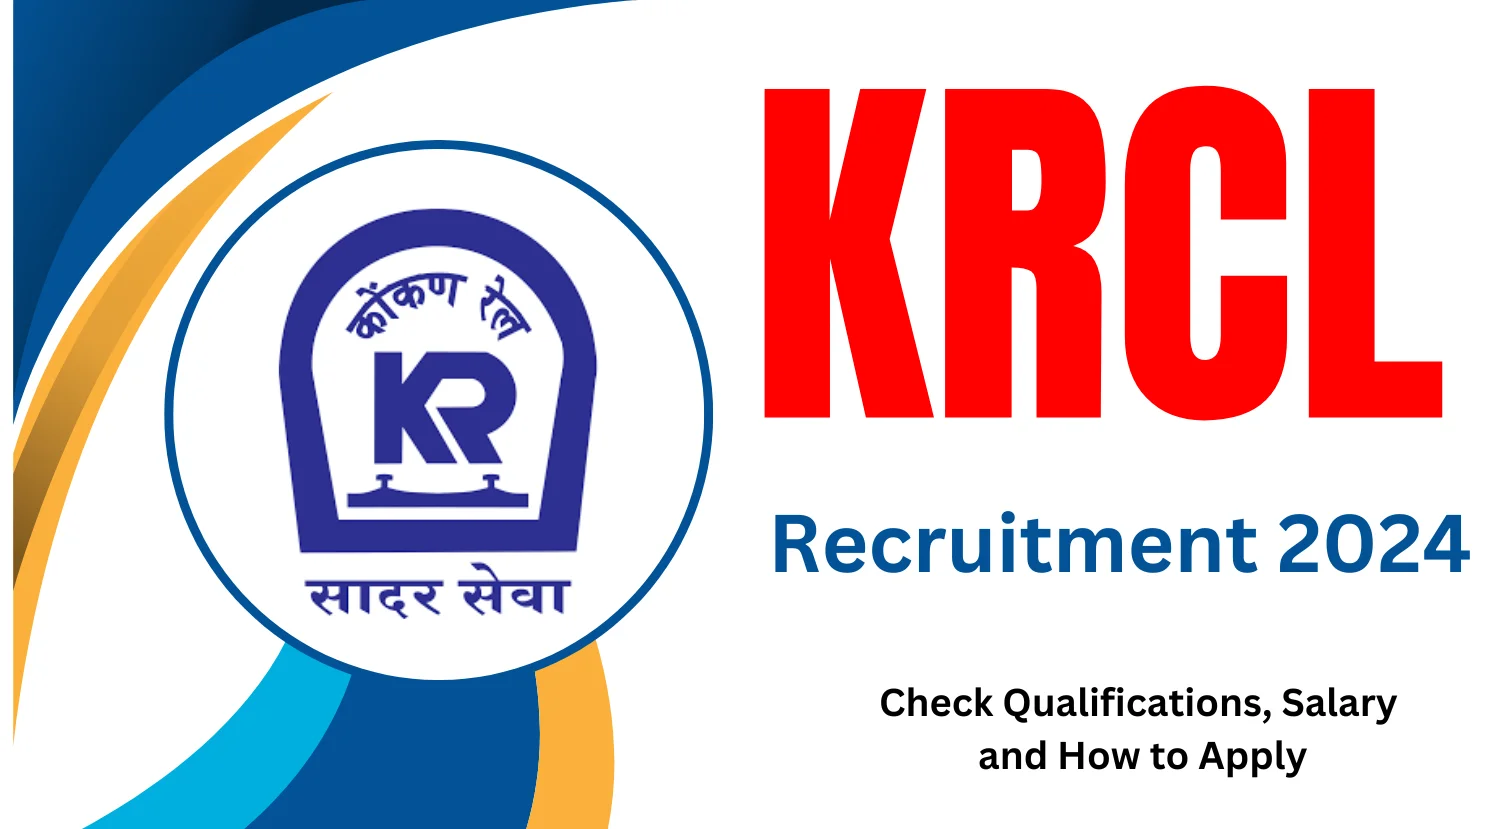 KRCL Director Operations Commercial Recruitment 2024